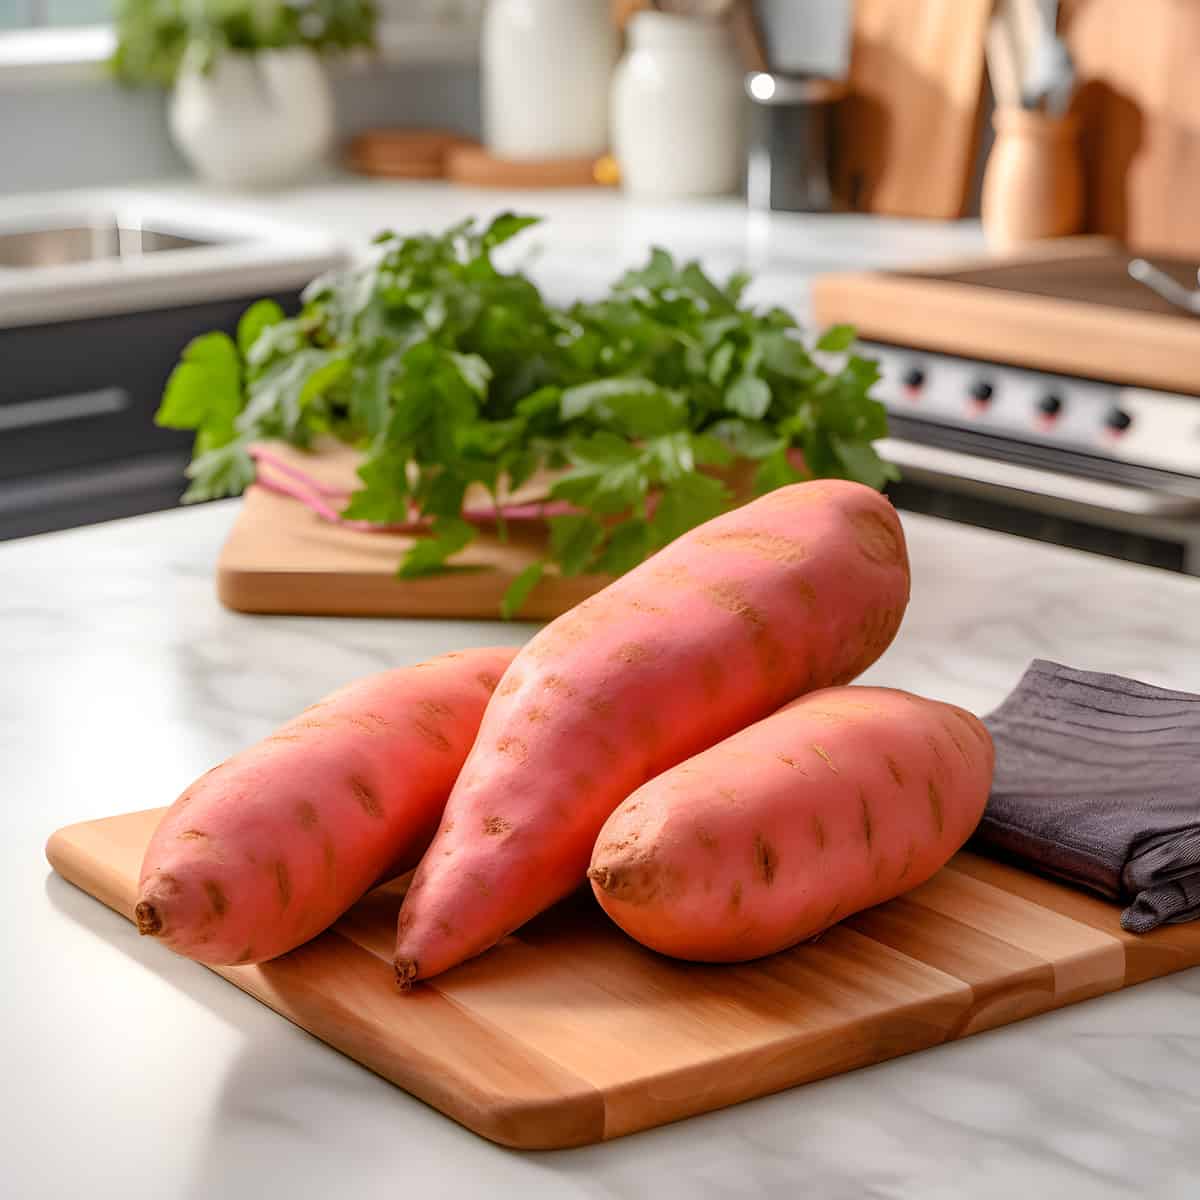 Southern Delite Sweet Potatoes on a kitchen counter